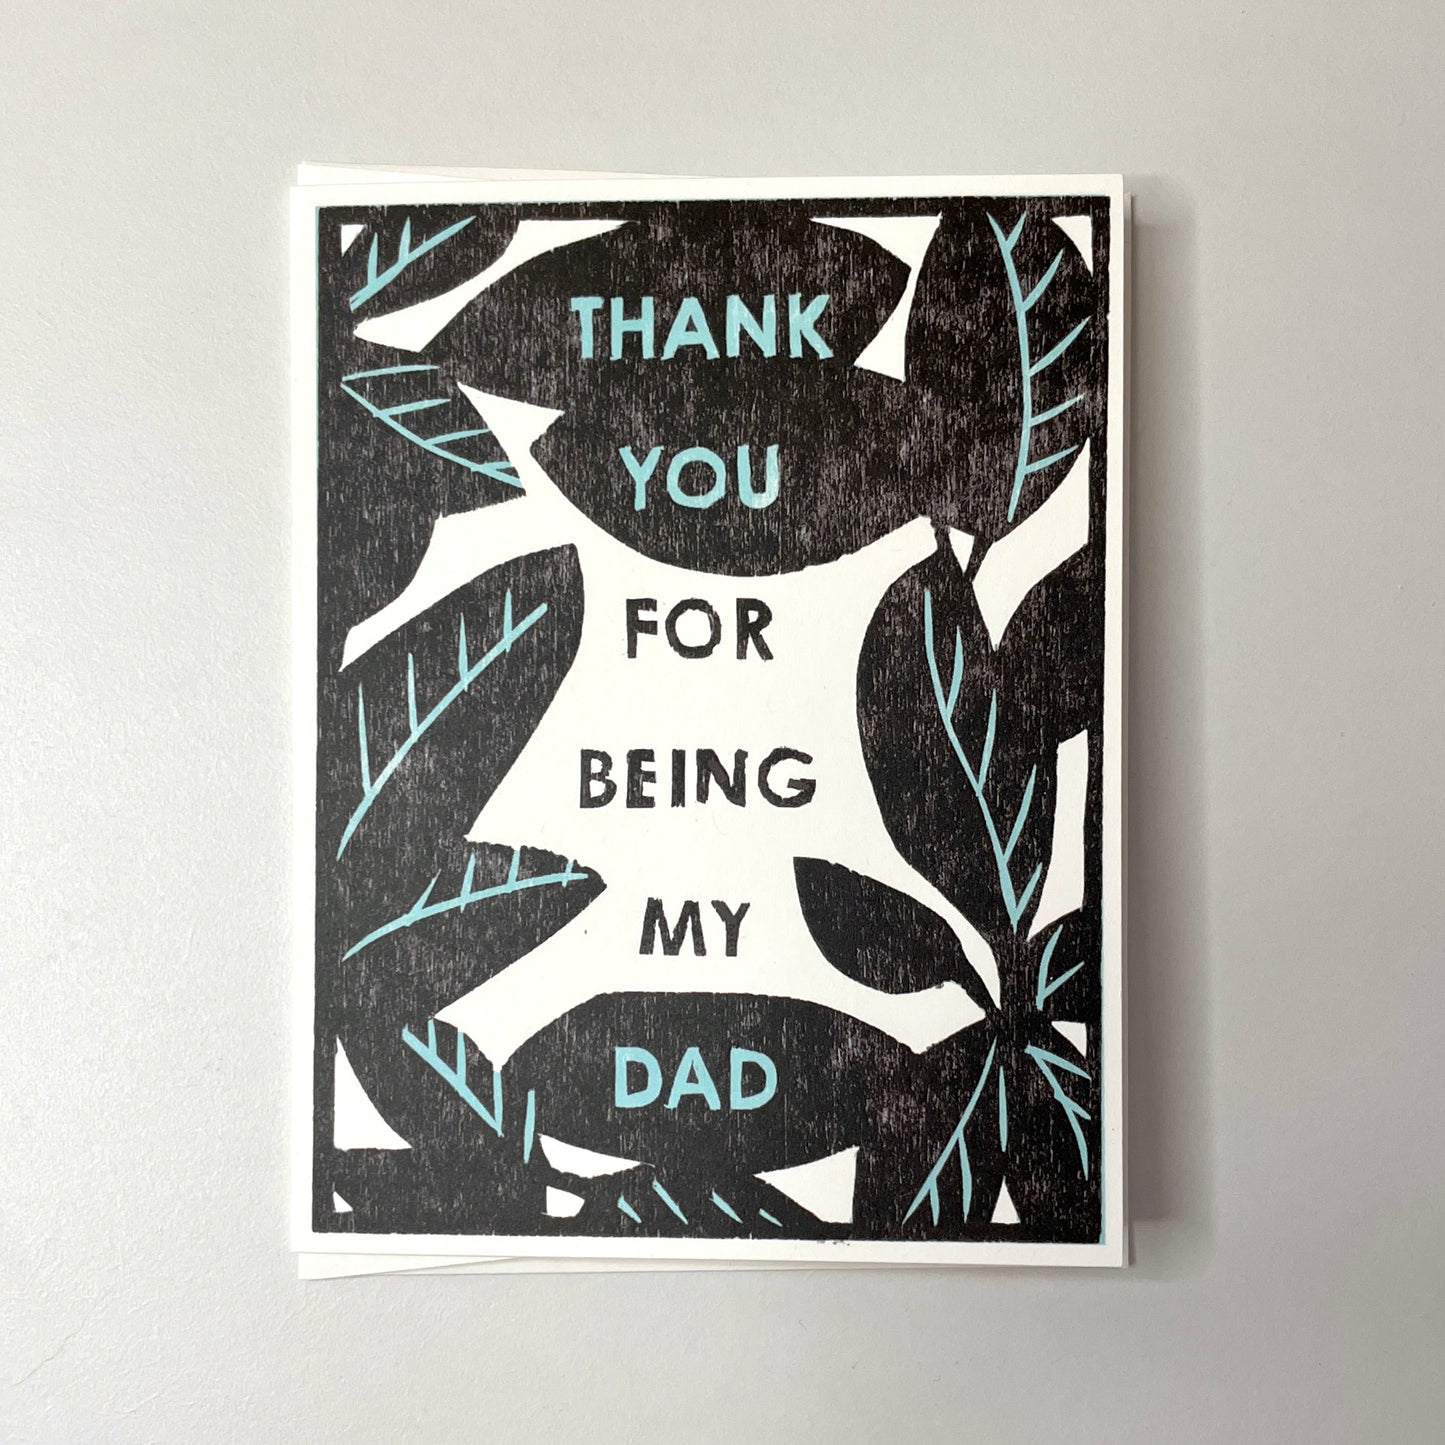 Thank You For Being My Dad Card